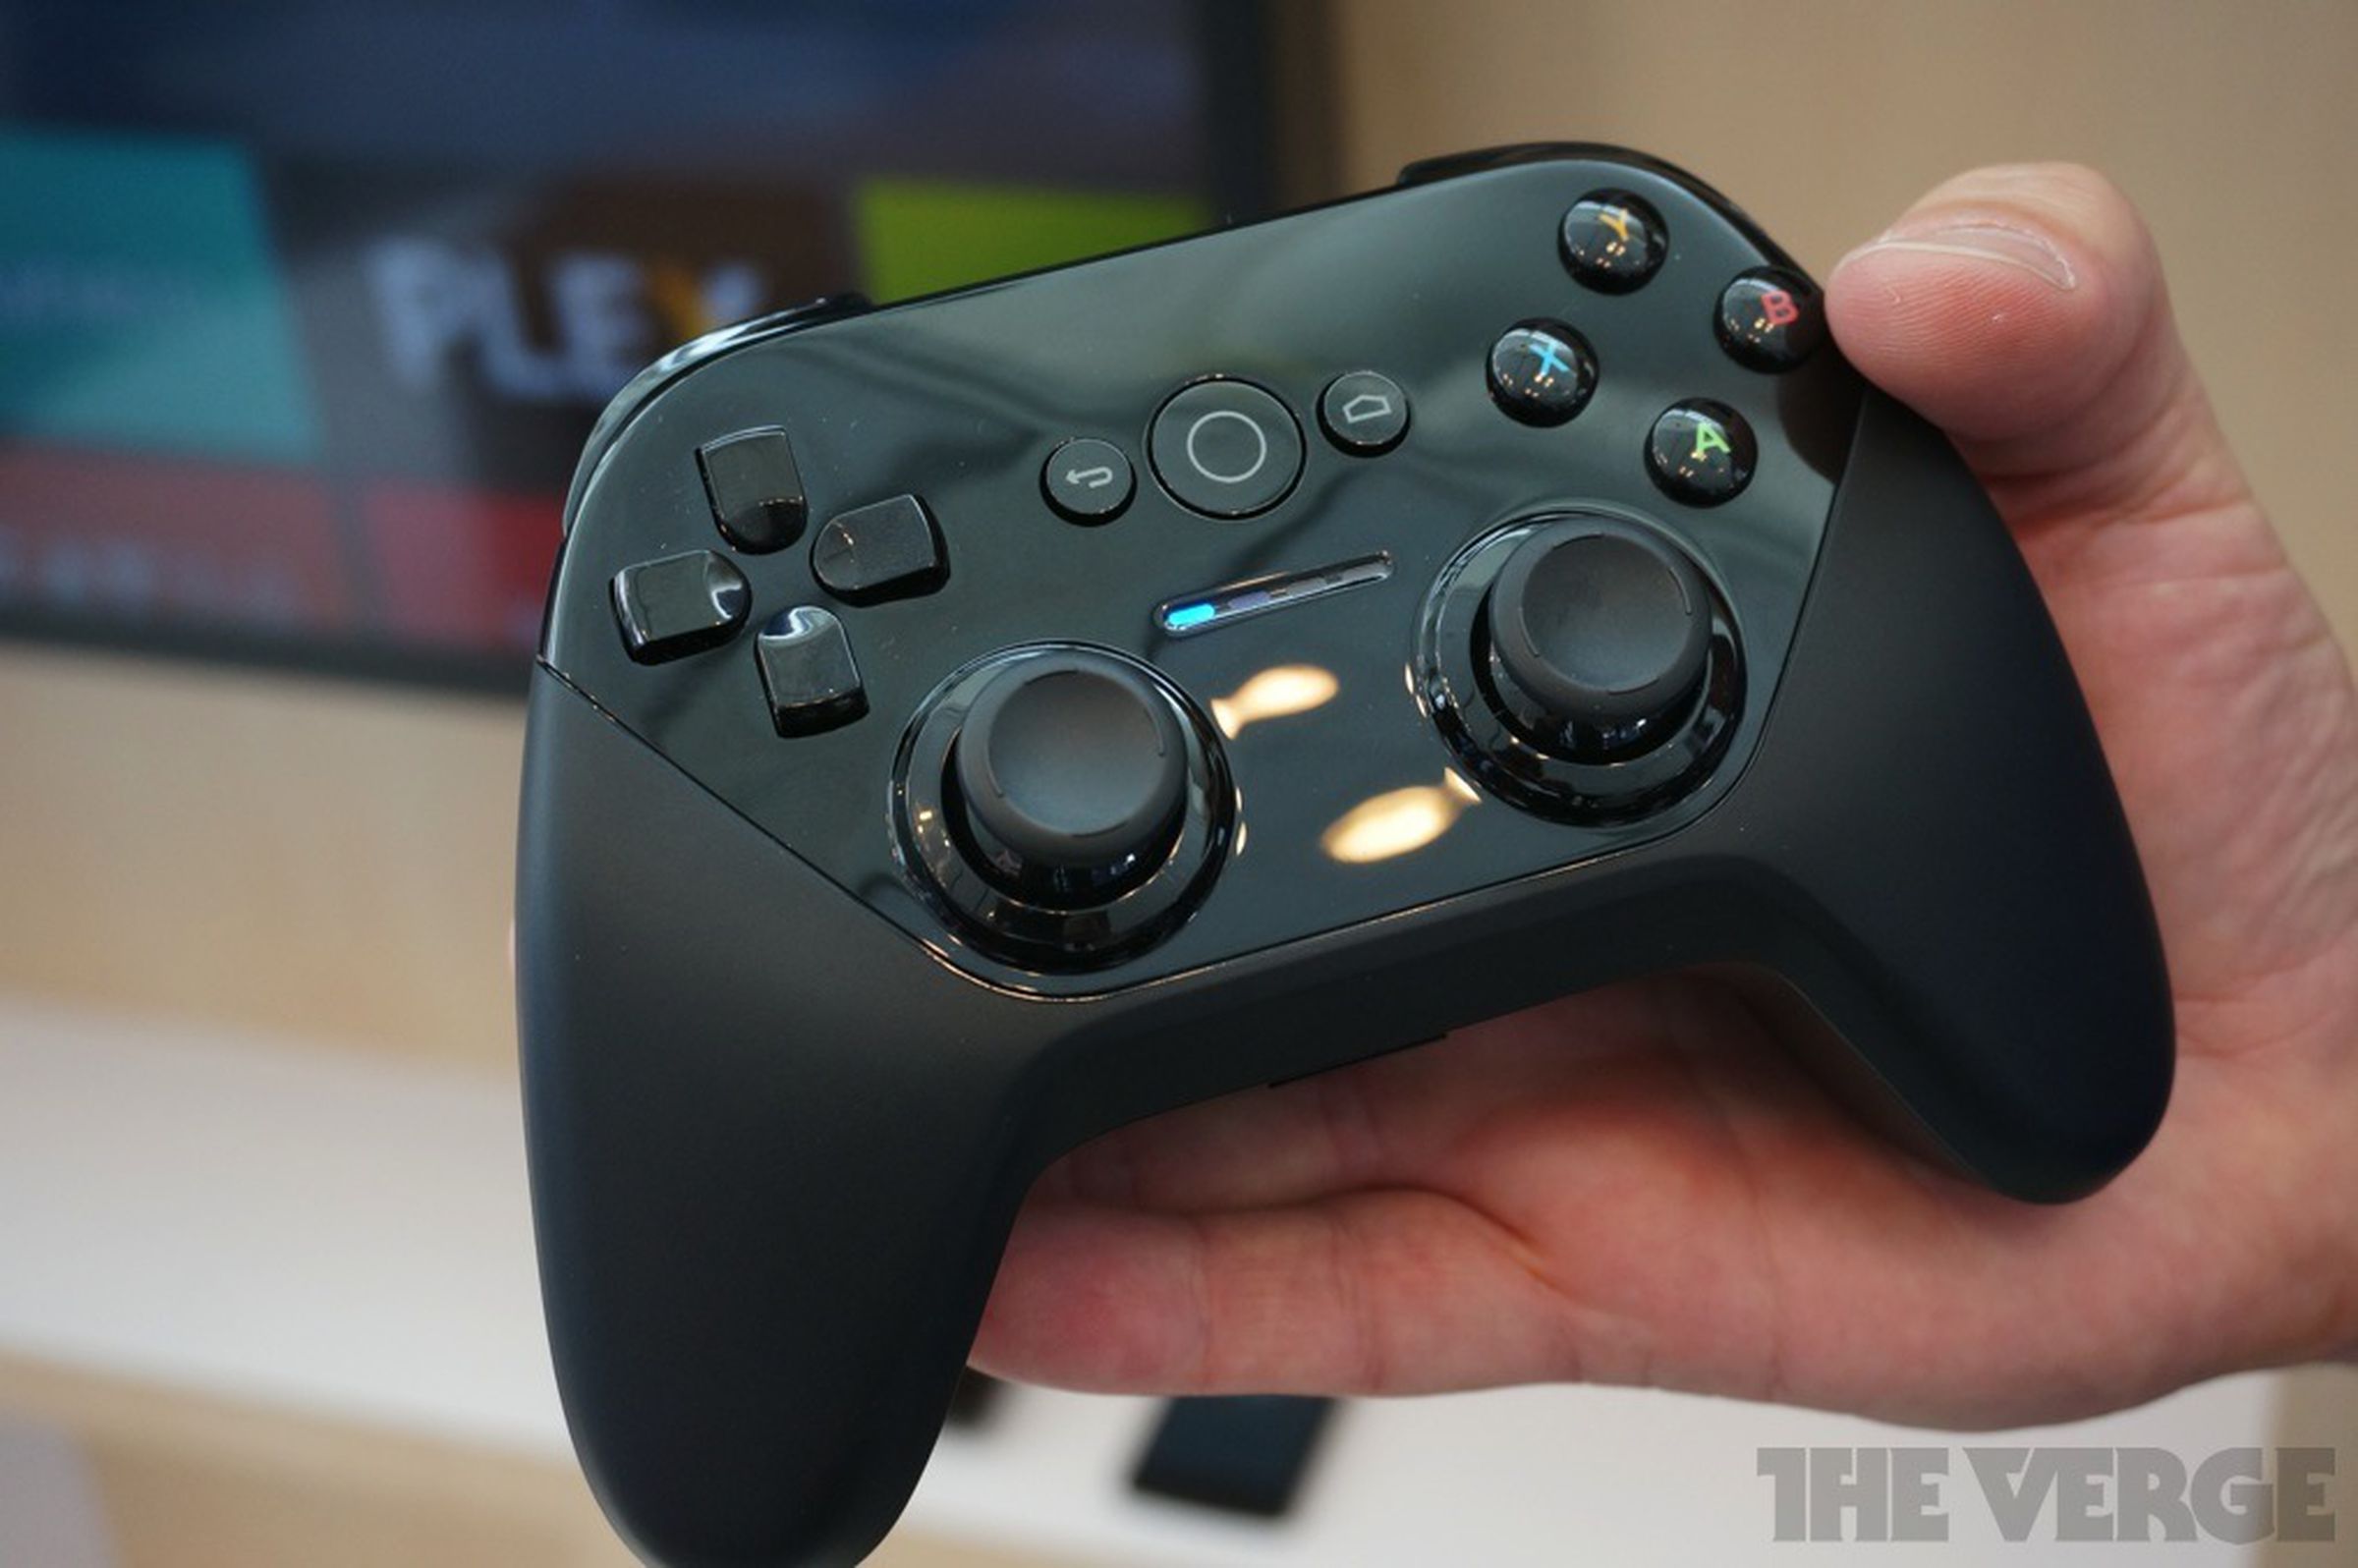 Android TV hands-on photos